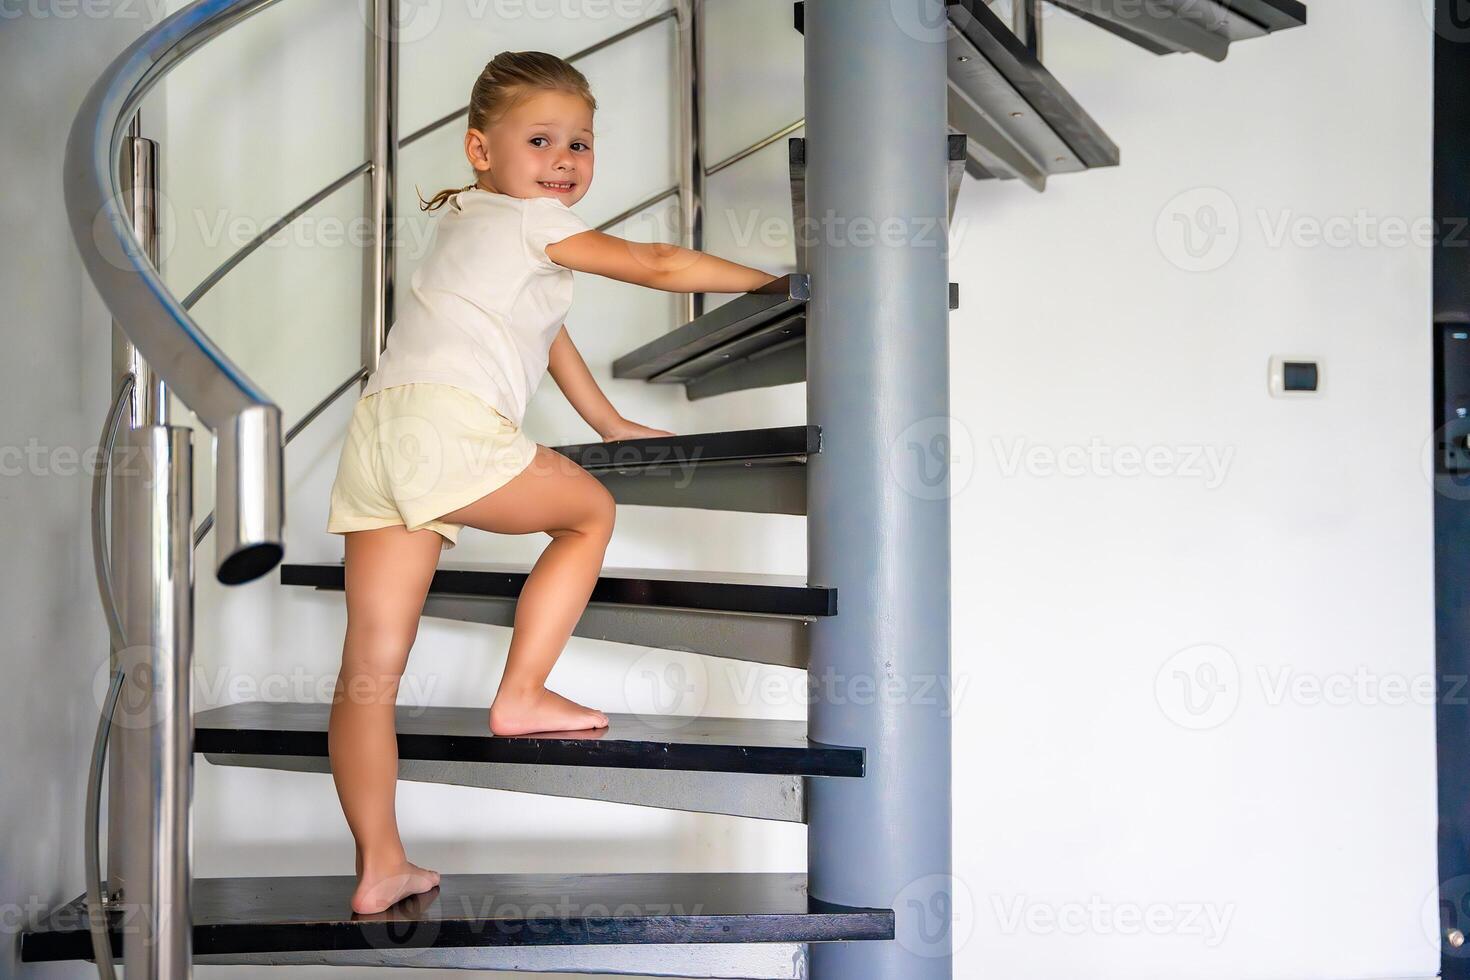 Little girl going up the stairs at modern home, child climbing spiral staircase. Dangerous situation at home. Child safety concept. photo